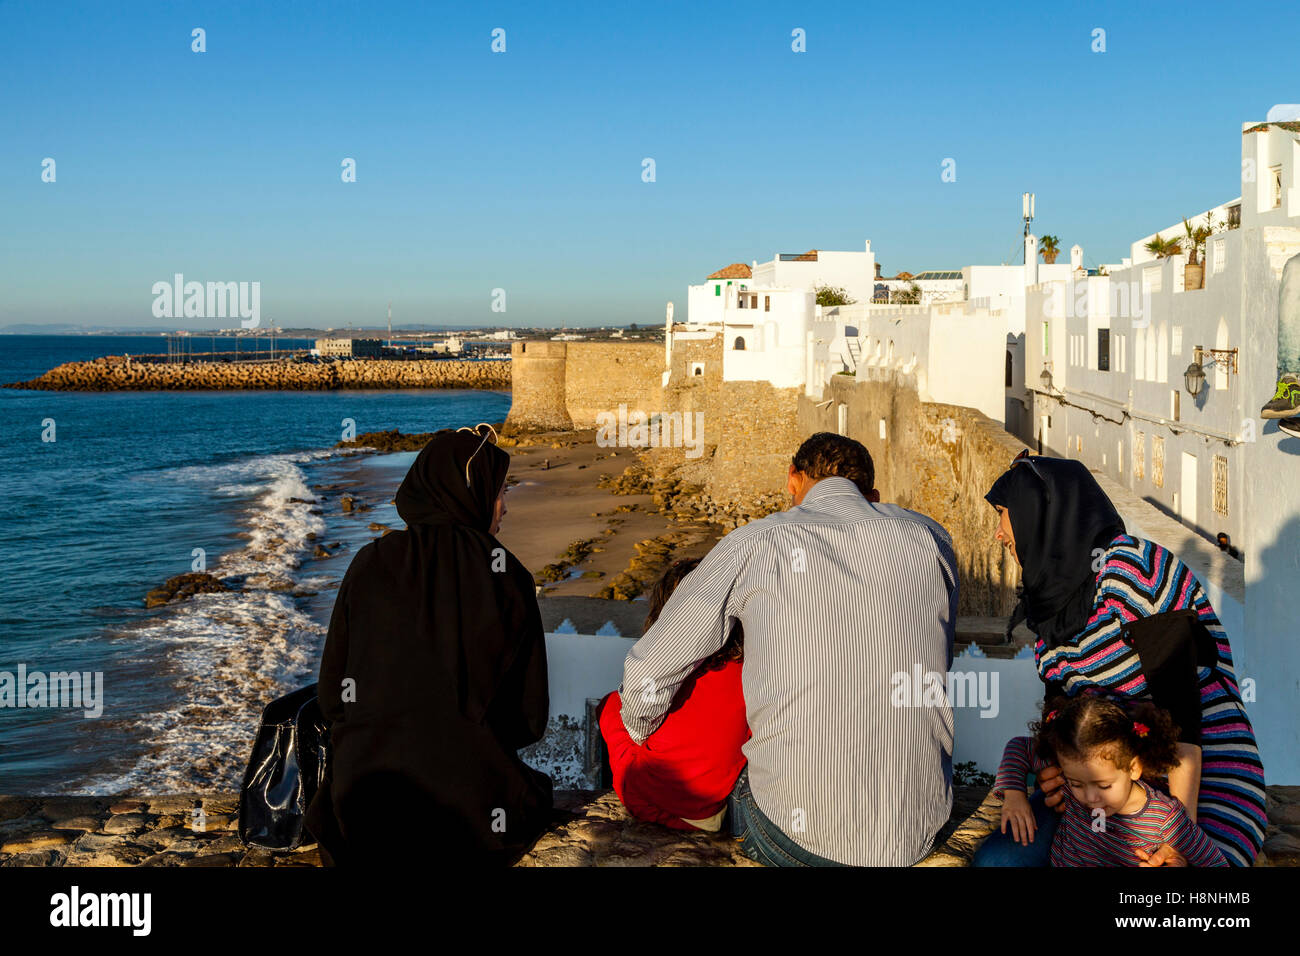 Moroccan People Look Out Over The Walled Medina Of Asilah At Sunset, Asilah, Morocco Stock Photo